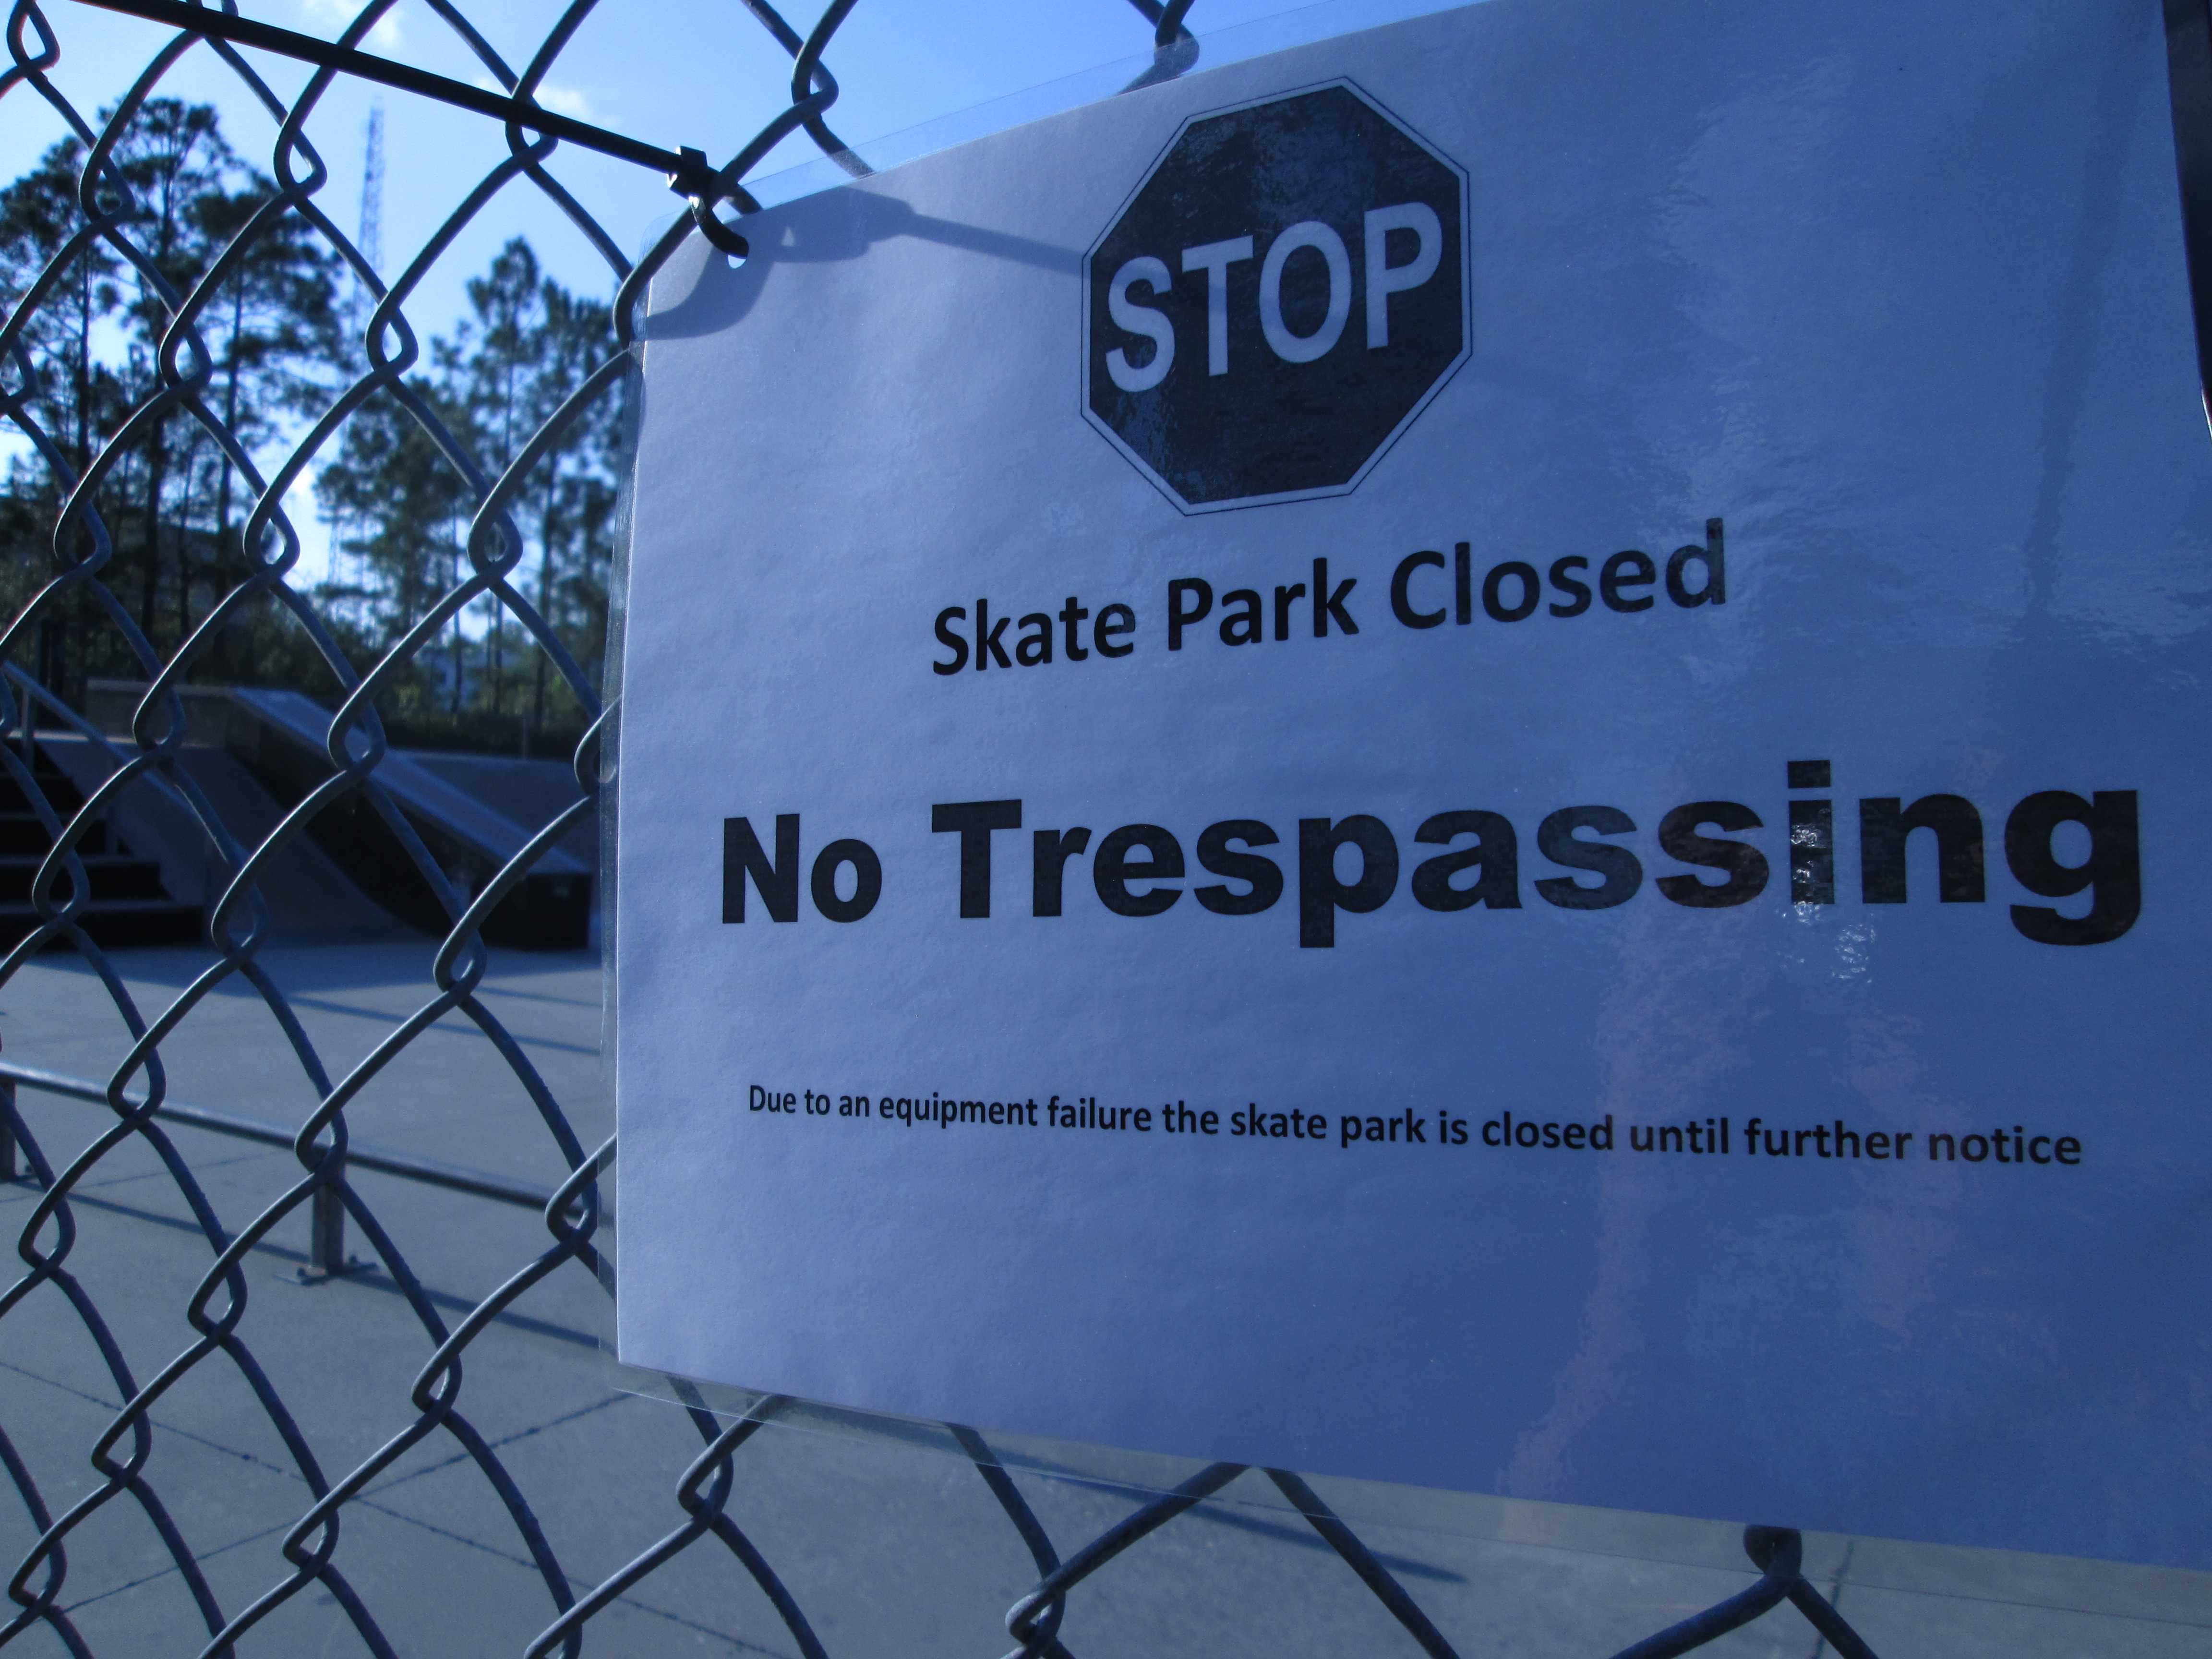 “No Trespassing” signs were posted along the fence late last March, with no forewarning that the park was closing.Photo by Jeremy Collard